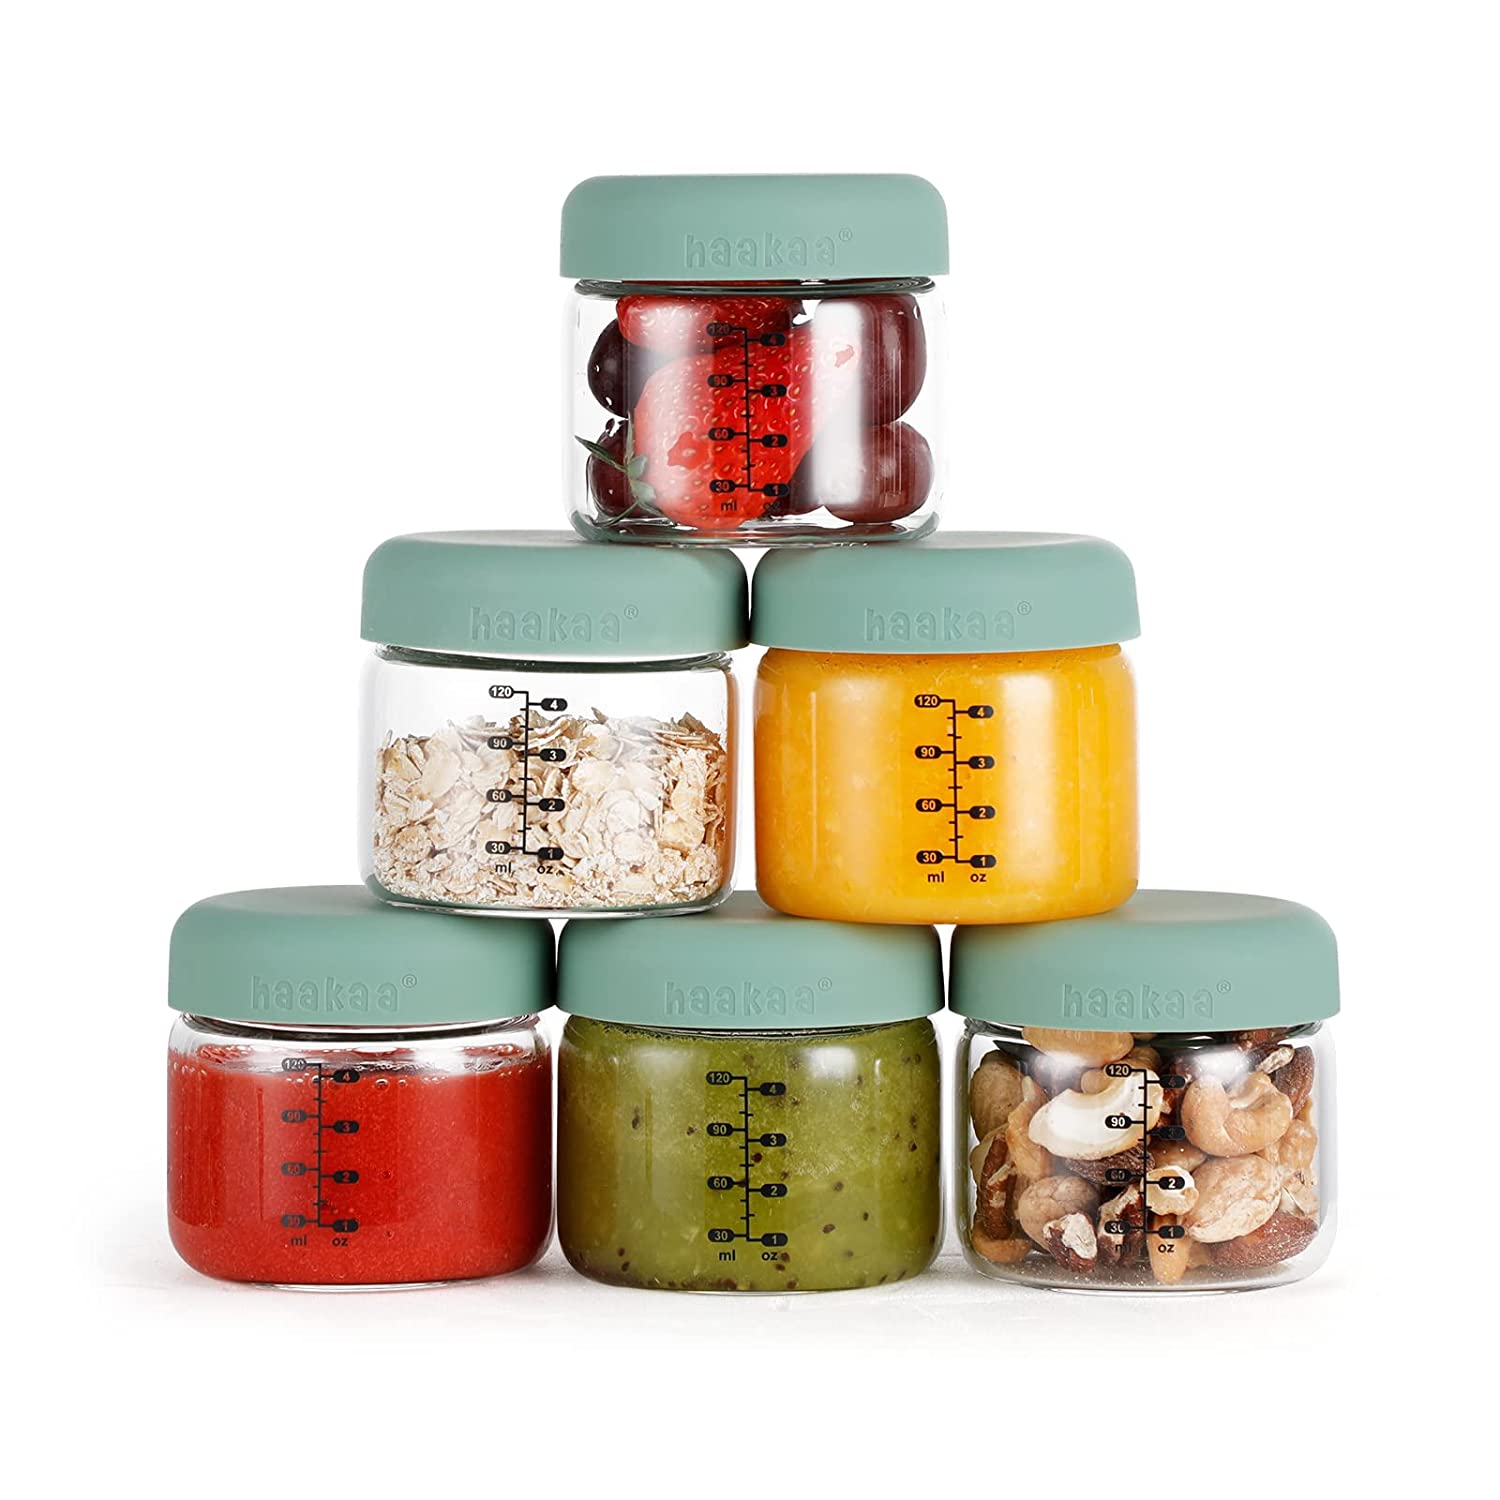 https://www.honeyhomereviews.com/content/images/2023/01/haakaa-High-Borosilicate-Glass-Baby-Food-Storage-Jars-with-Silicone-Lid-6.jpg